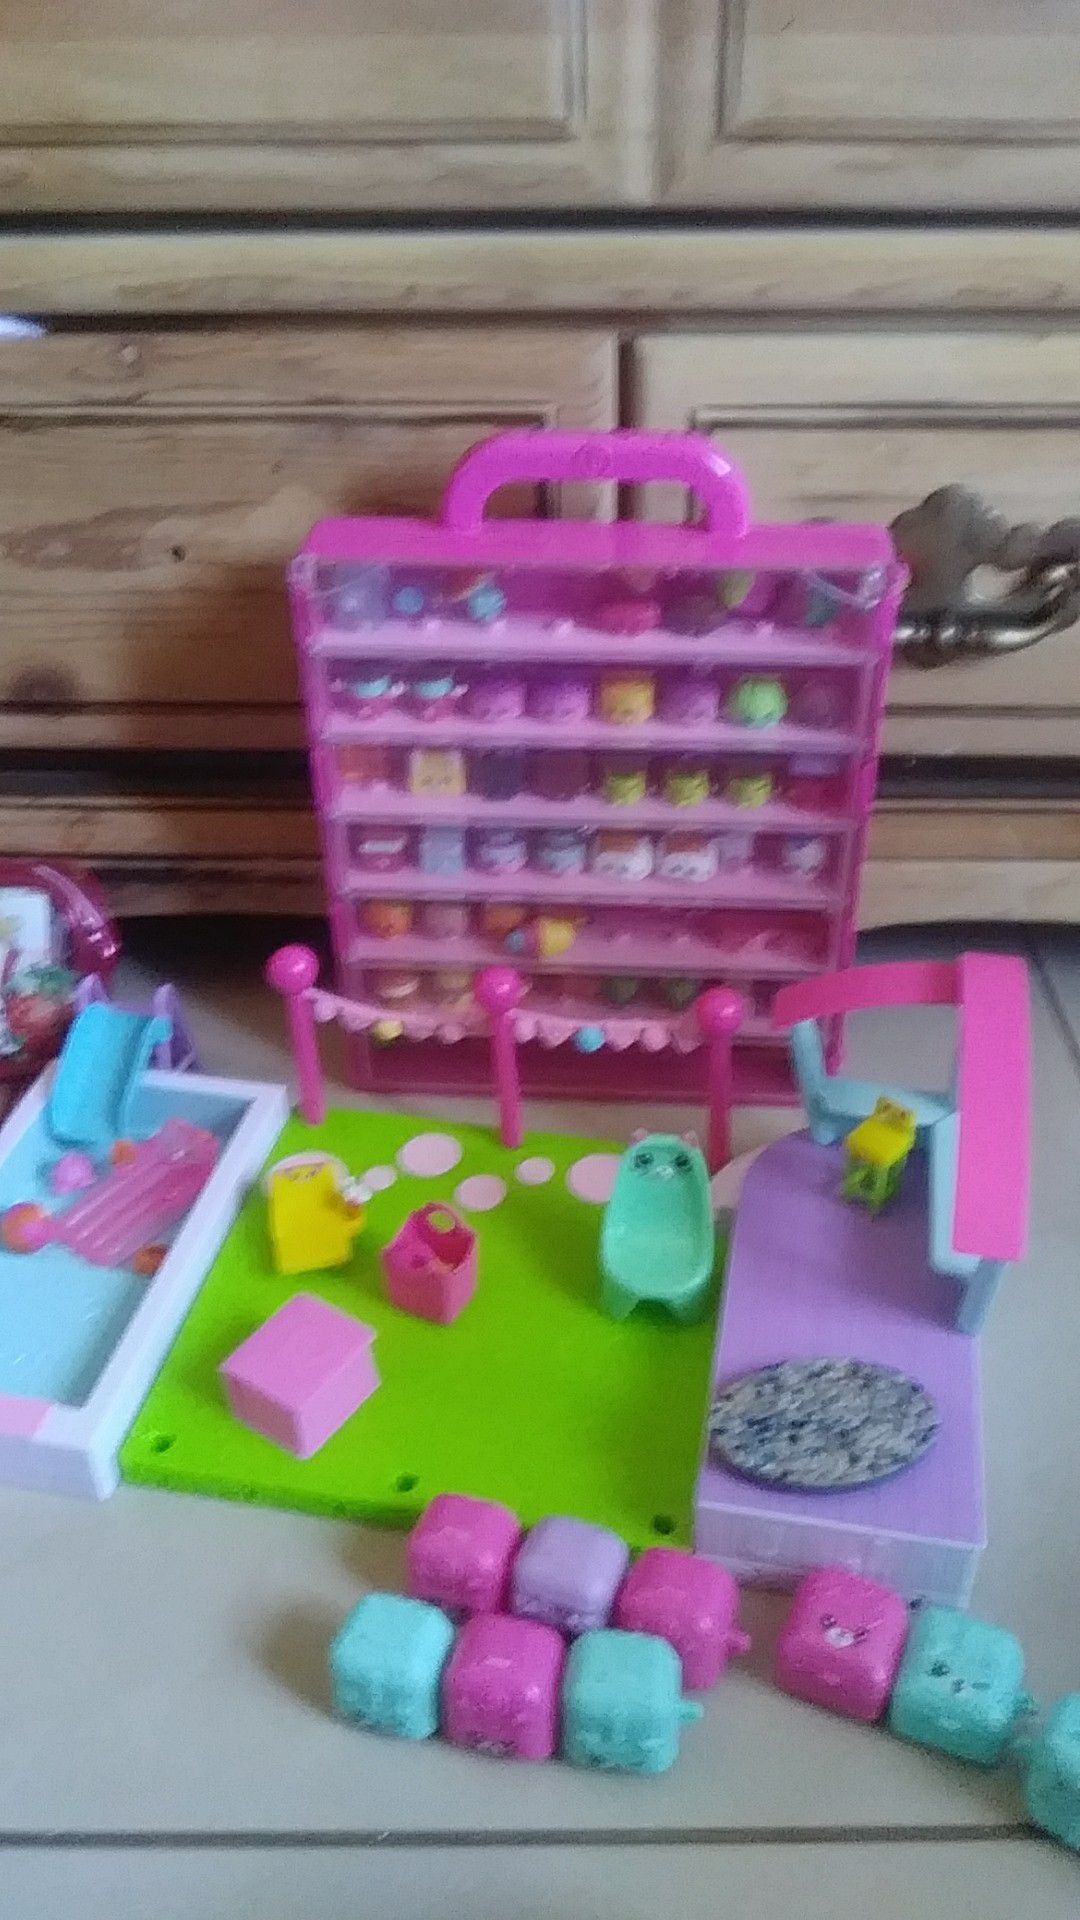 Shopkins and accesorirs